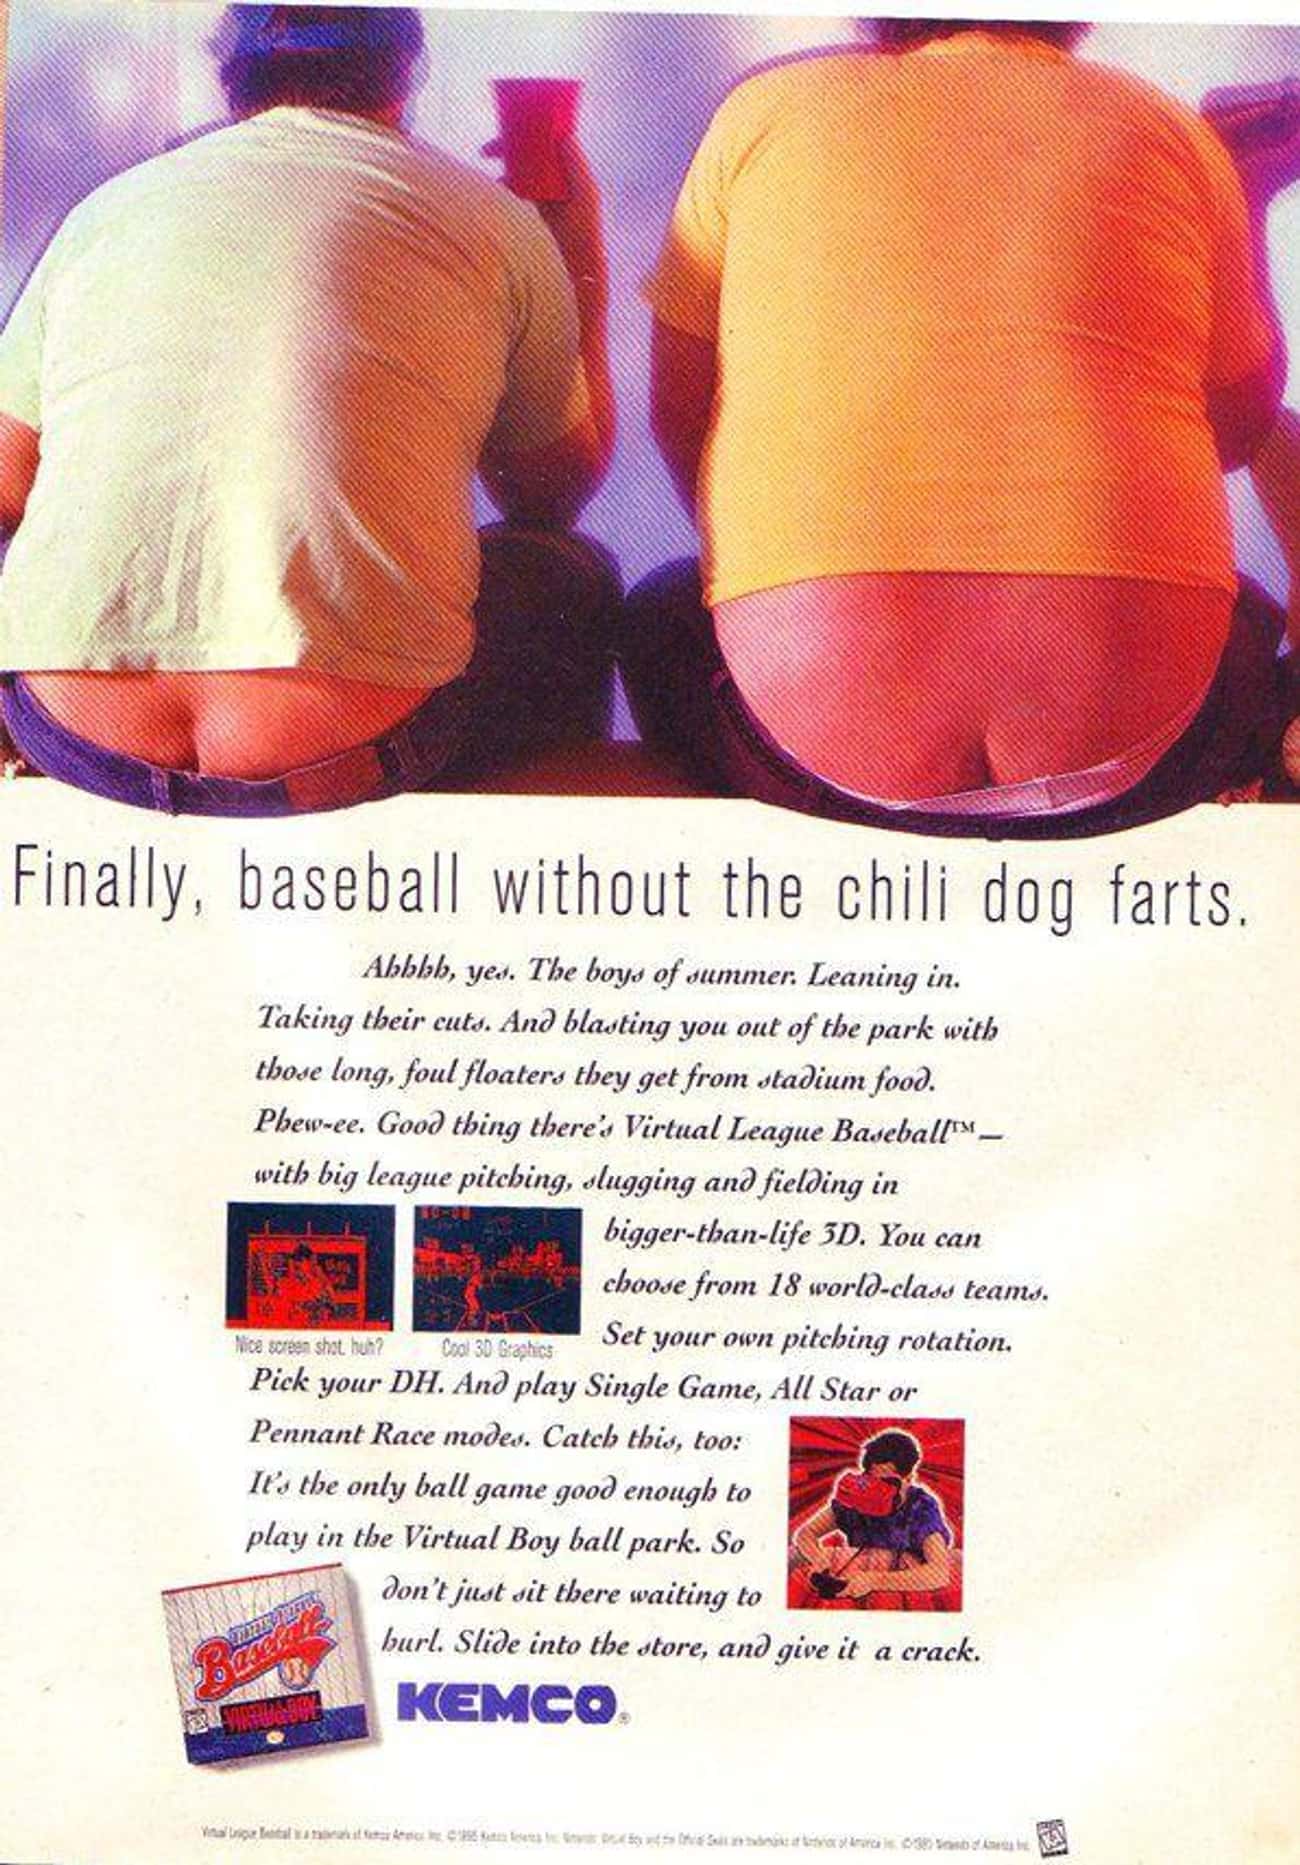 Vintage Gaming Ads - chili dog farts - Finally, baseball without the chili dog farts. Abbbb, yes. The boys of summer. Leaning in. Taking their cuts. And blasting you out of the park with those long, foul floaters they get from stadium food. Phewee. Good t